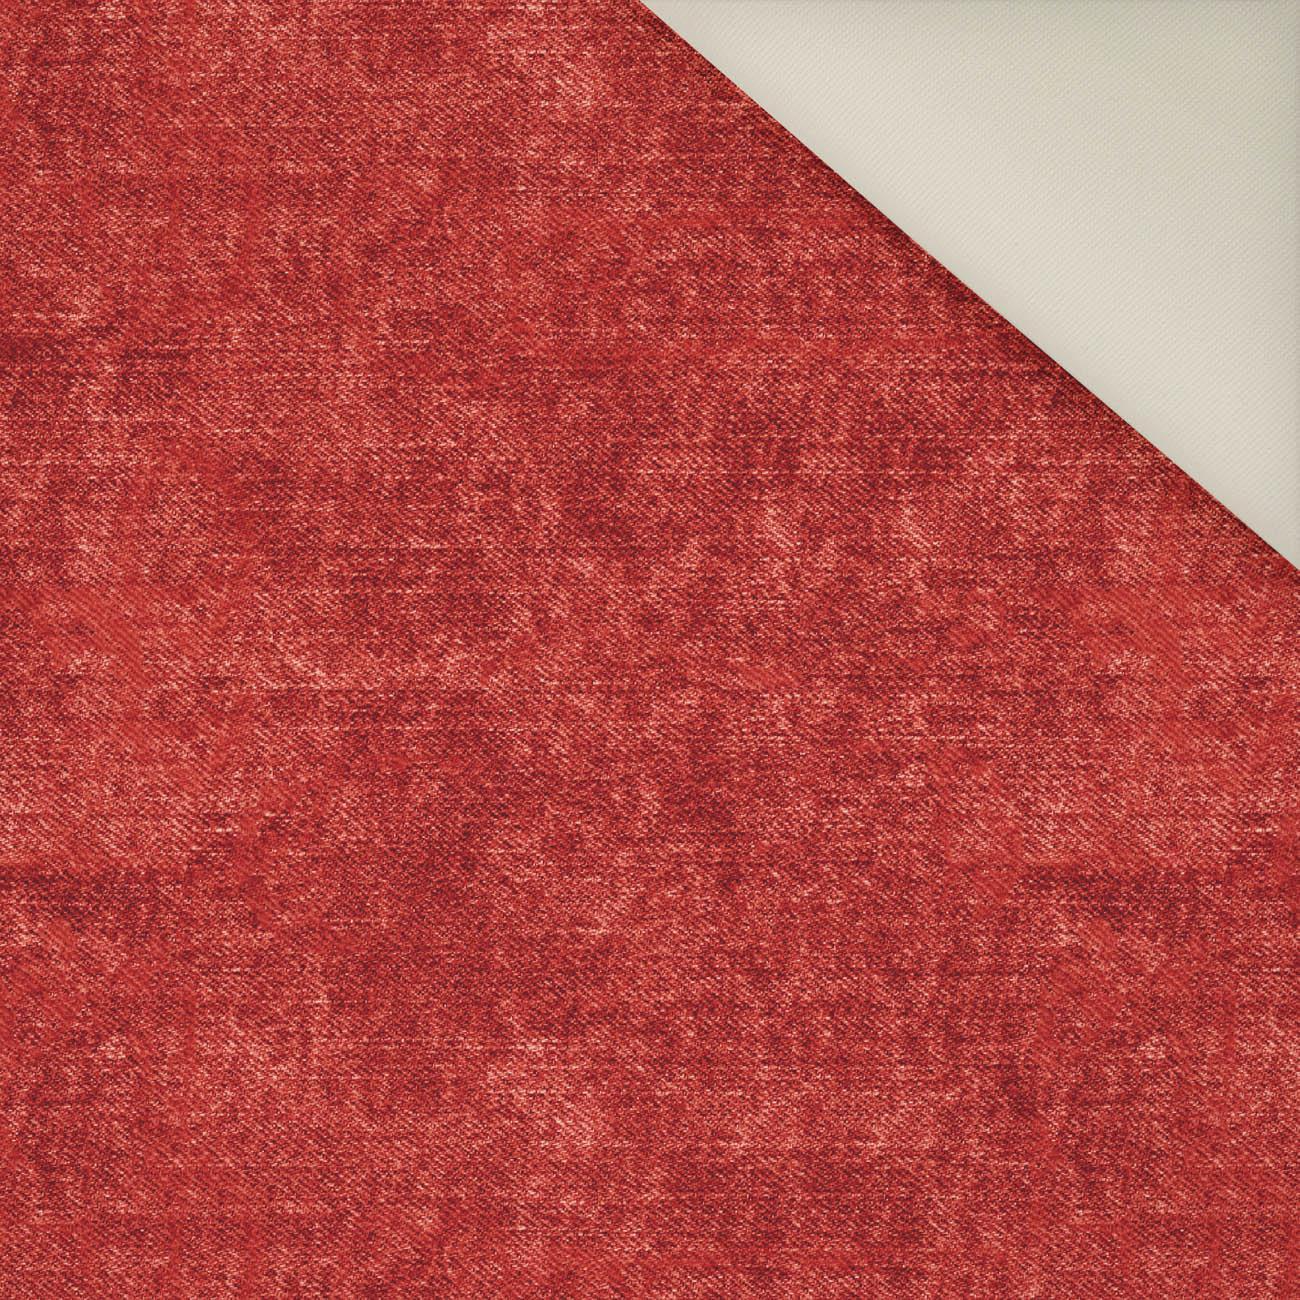 ACID WASH / RED- Upholstery velour 